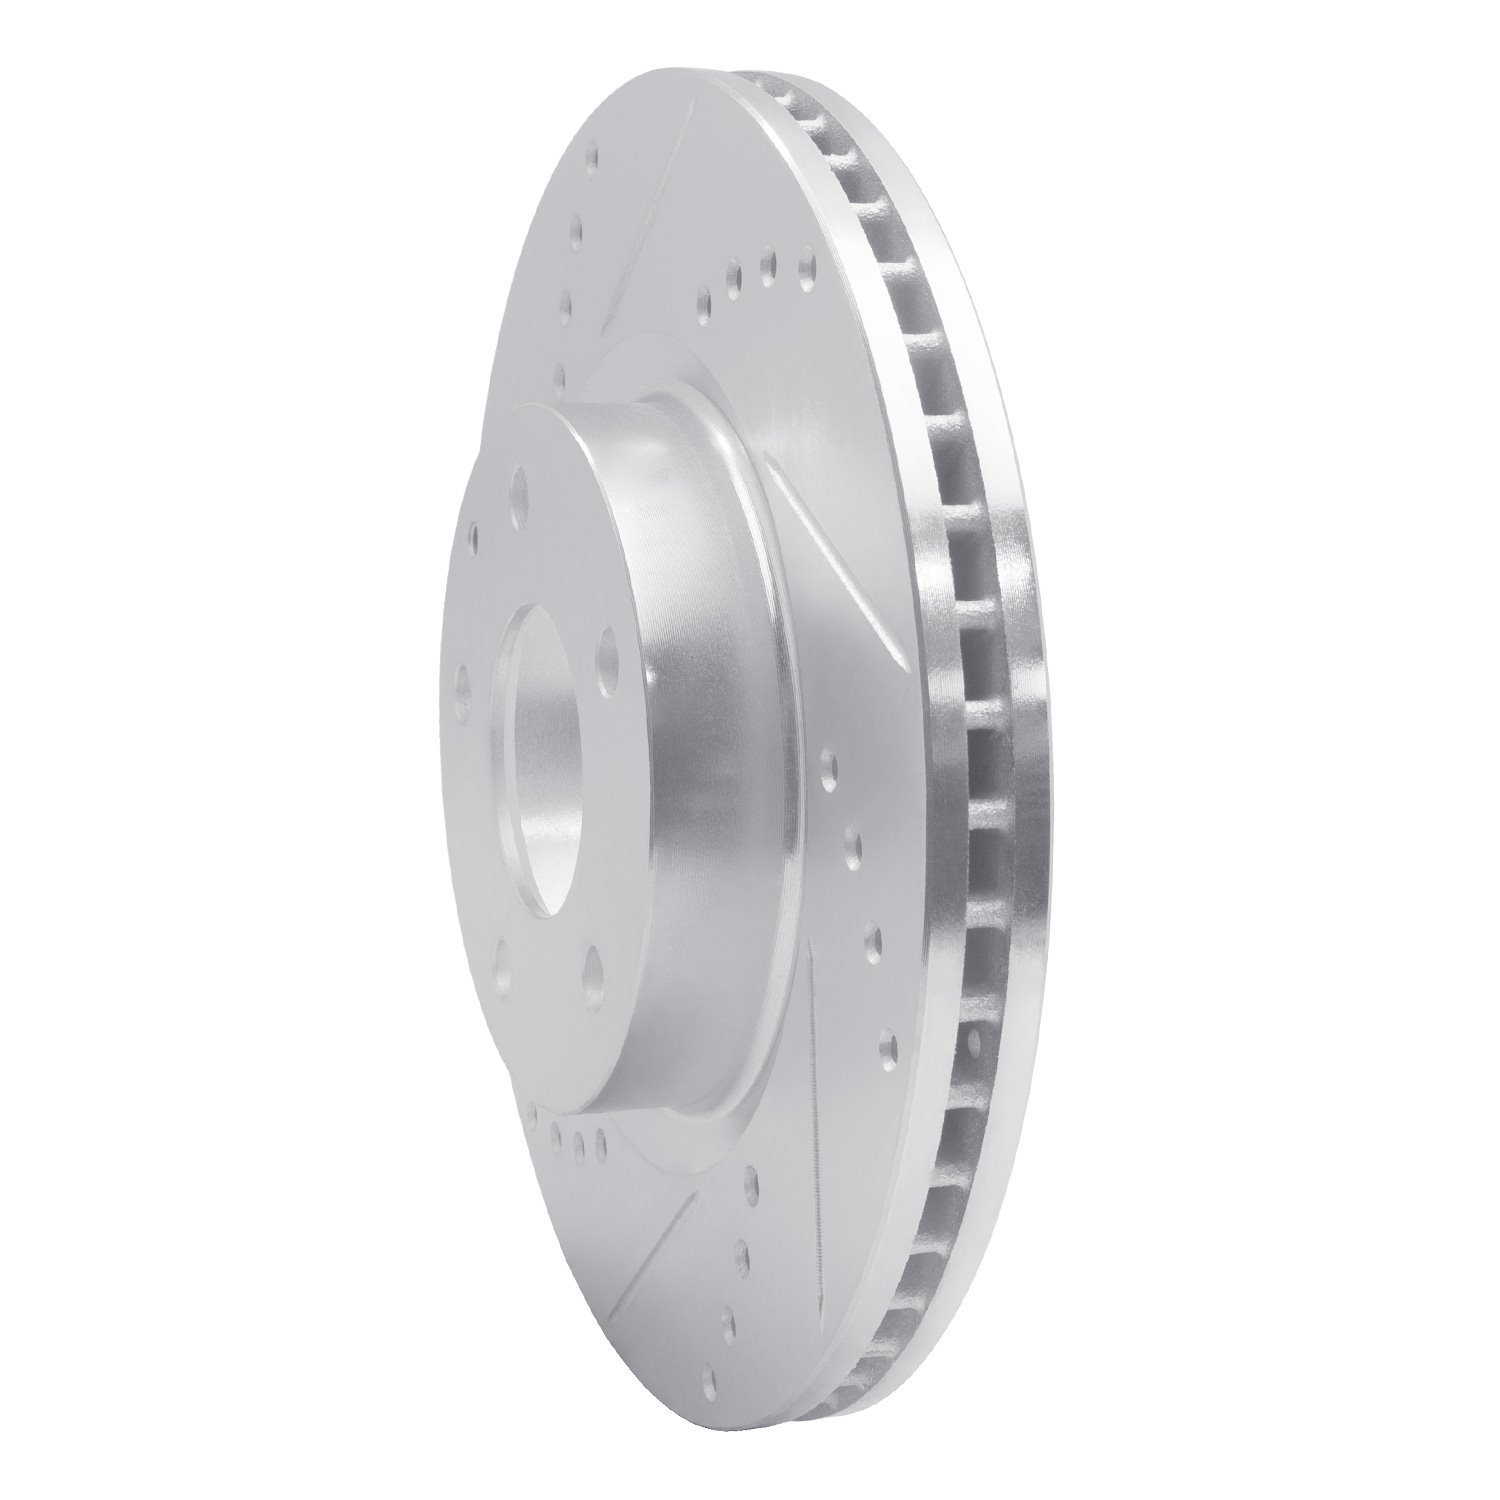 Drilled/Slotted Brake Rotor [Silver], Fits Select